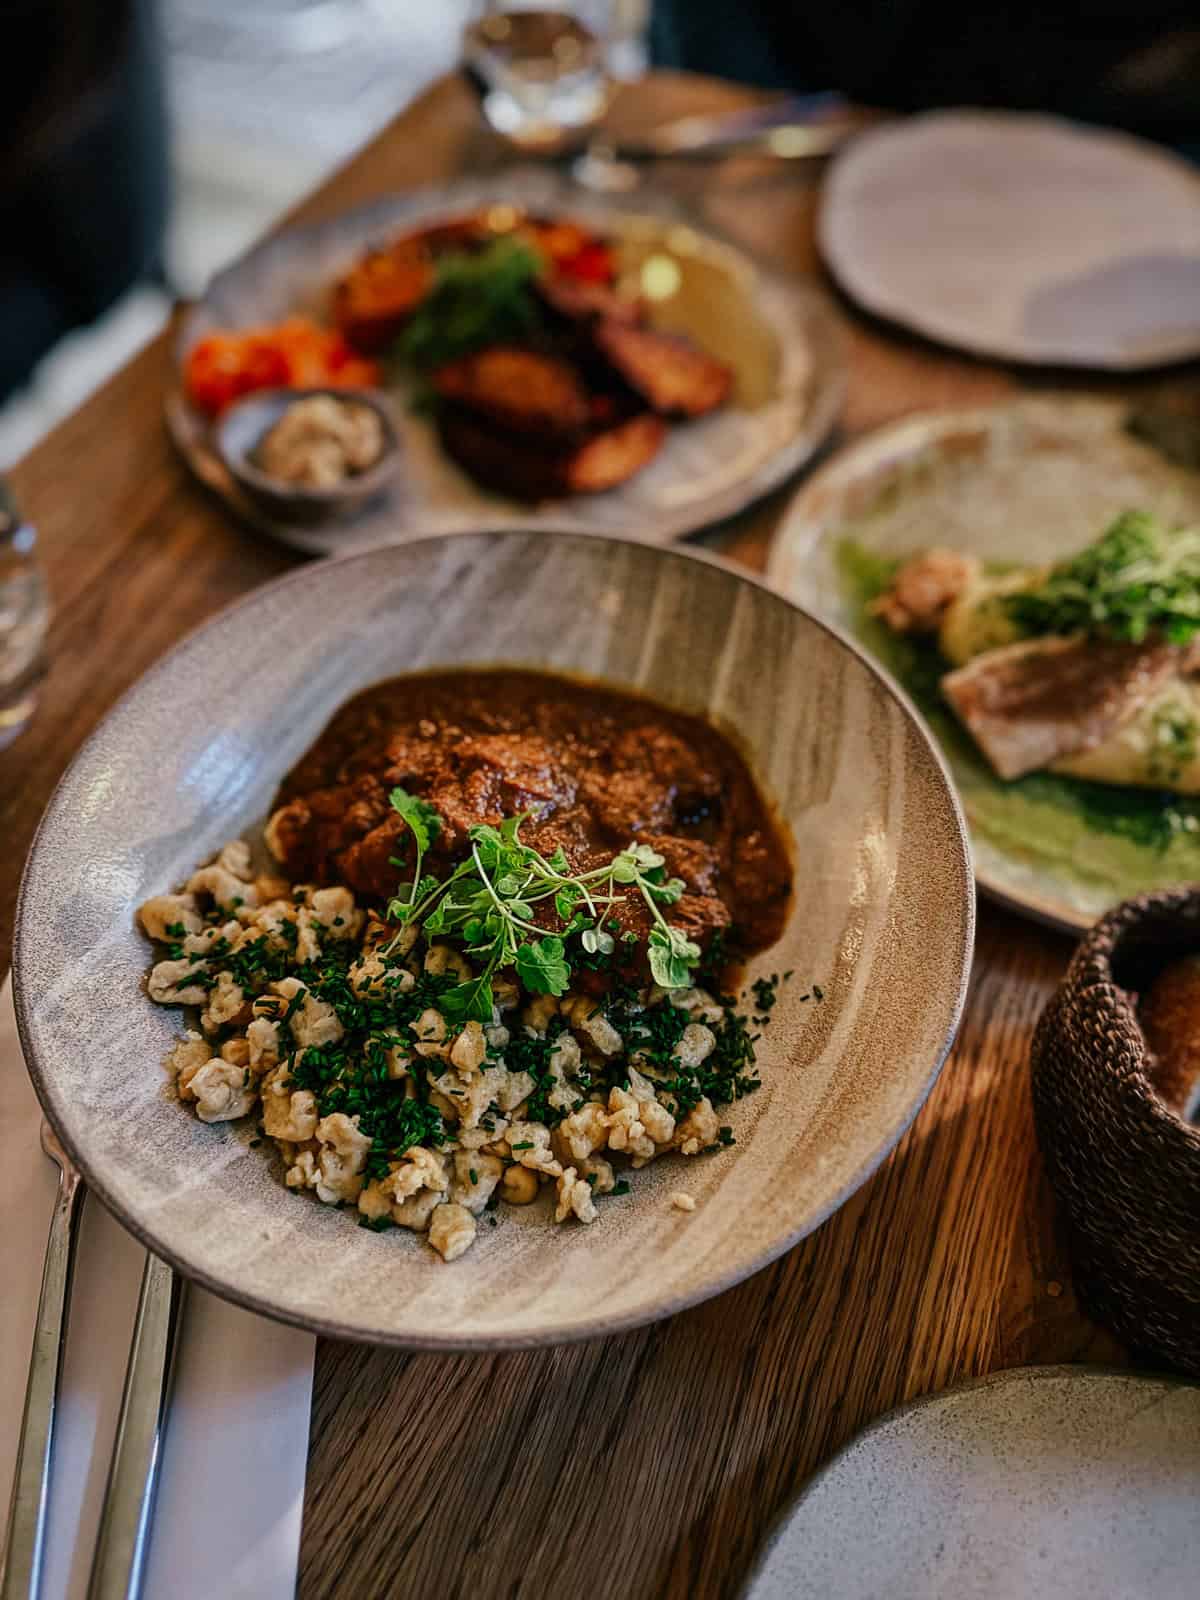 A plate of traditional Hungarian goulash with spaetzle, garnished with fresh herbs, served at a restaurant with other dishes in the background